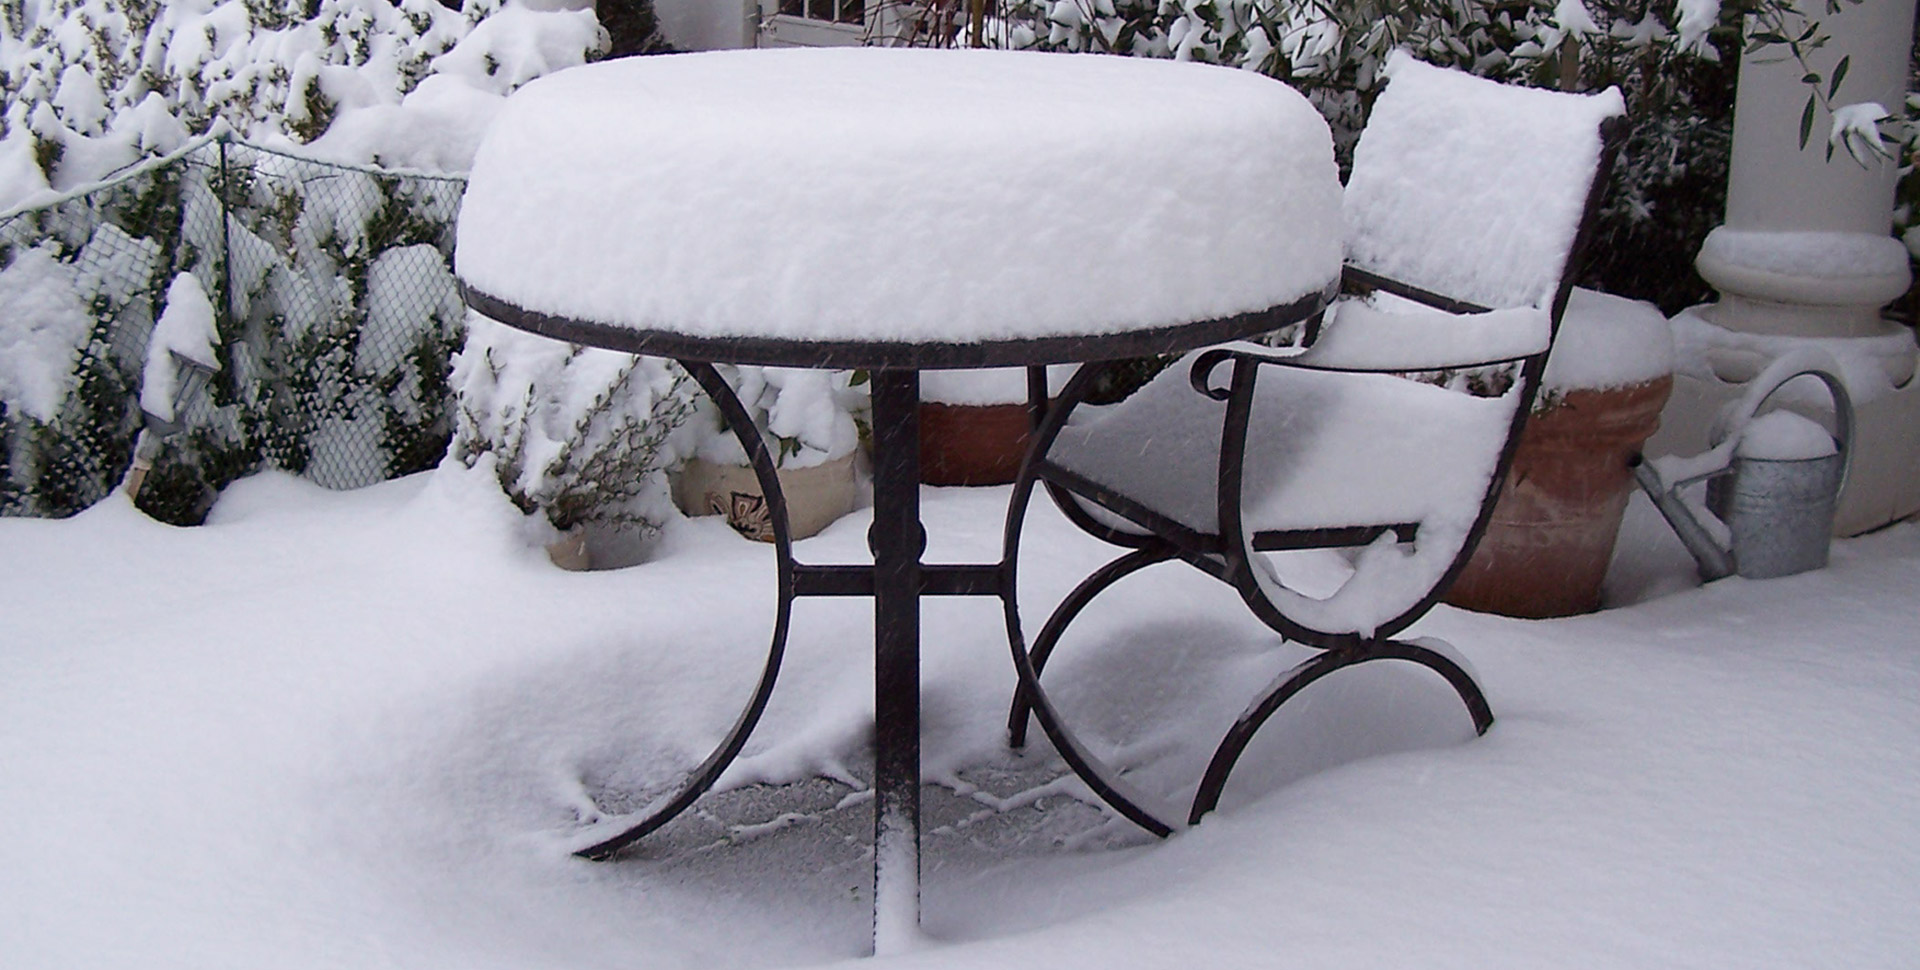 lava stone table with snow